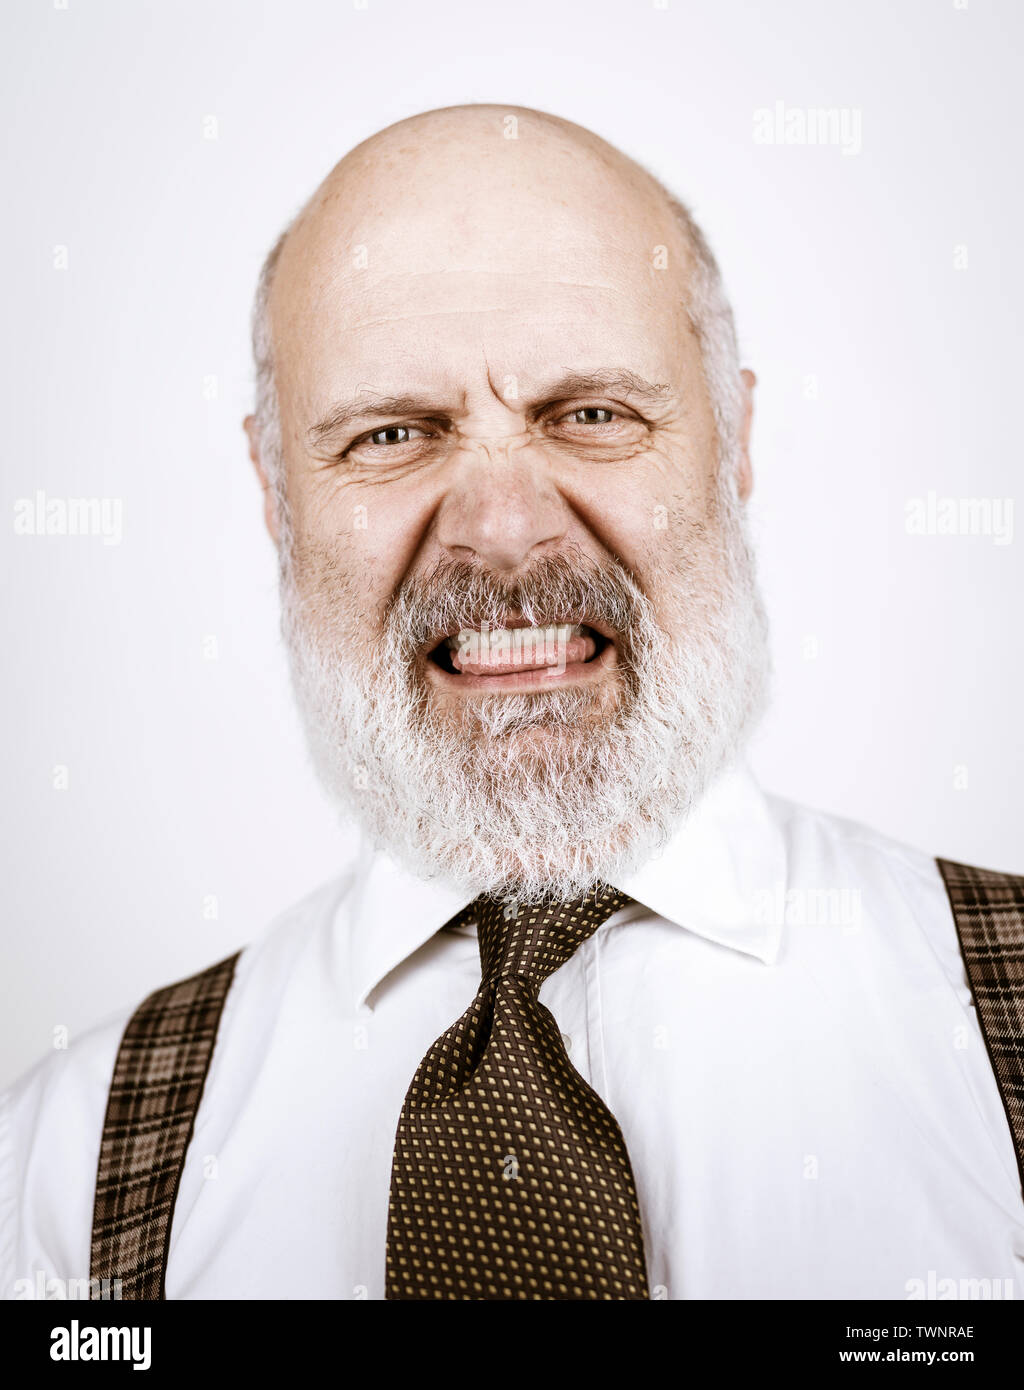 Disgusted funny senior man looking at camera, white background Stock Photo